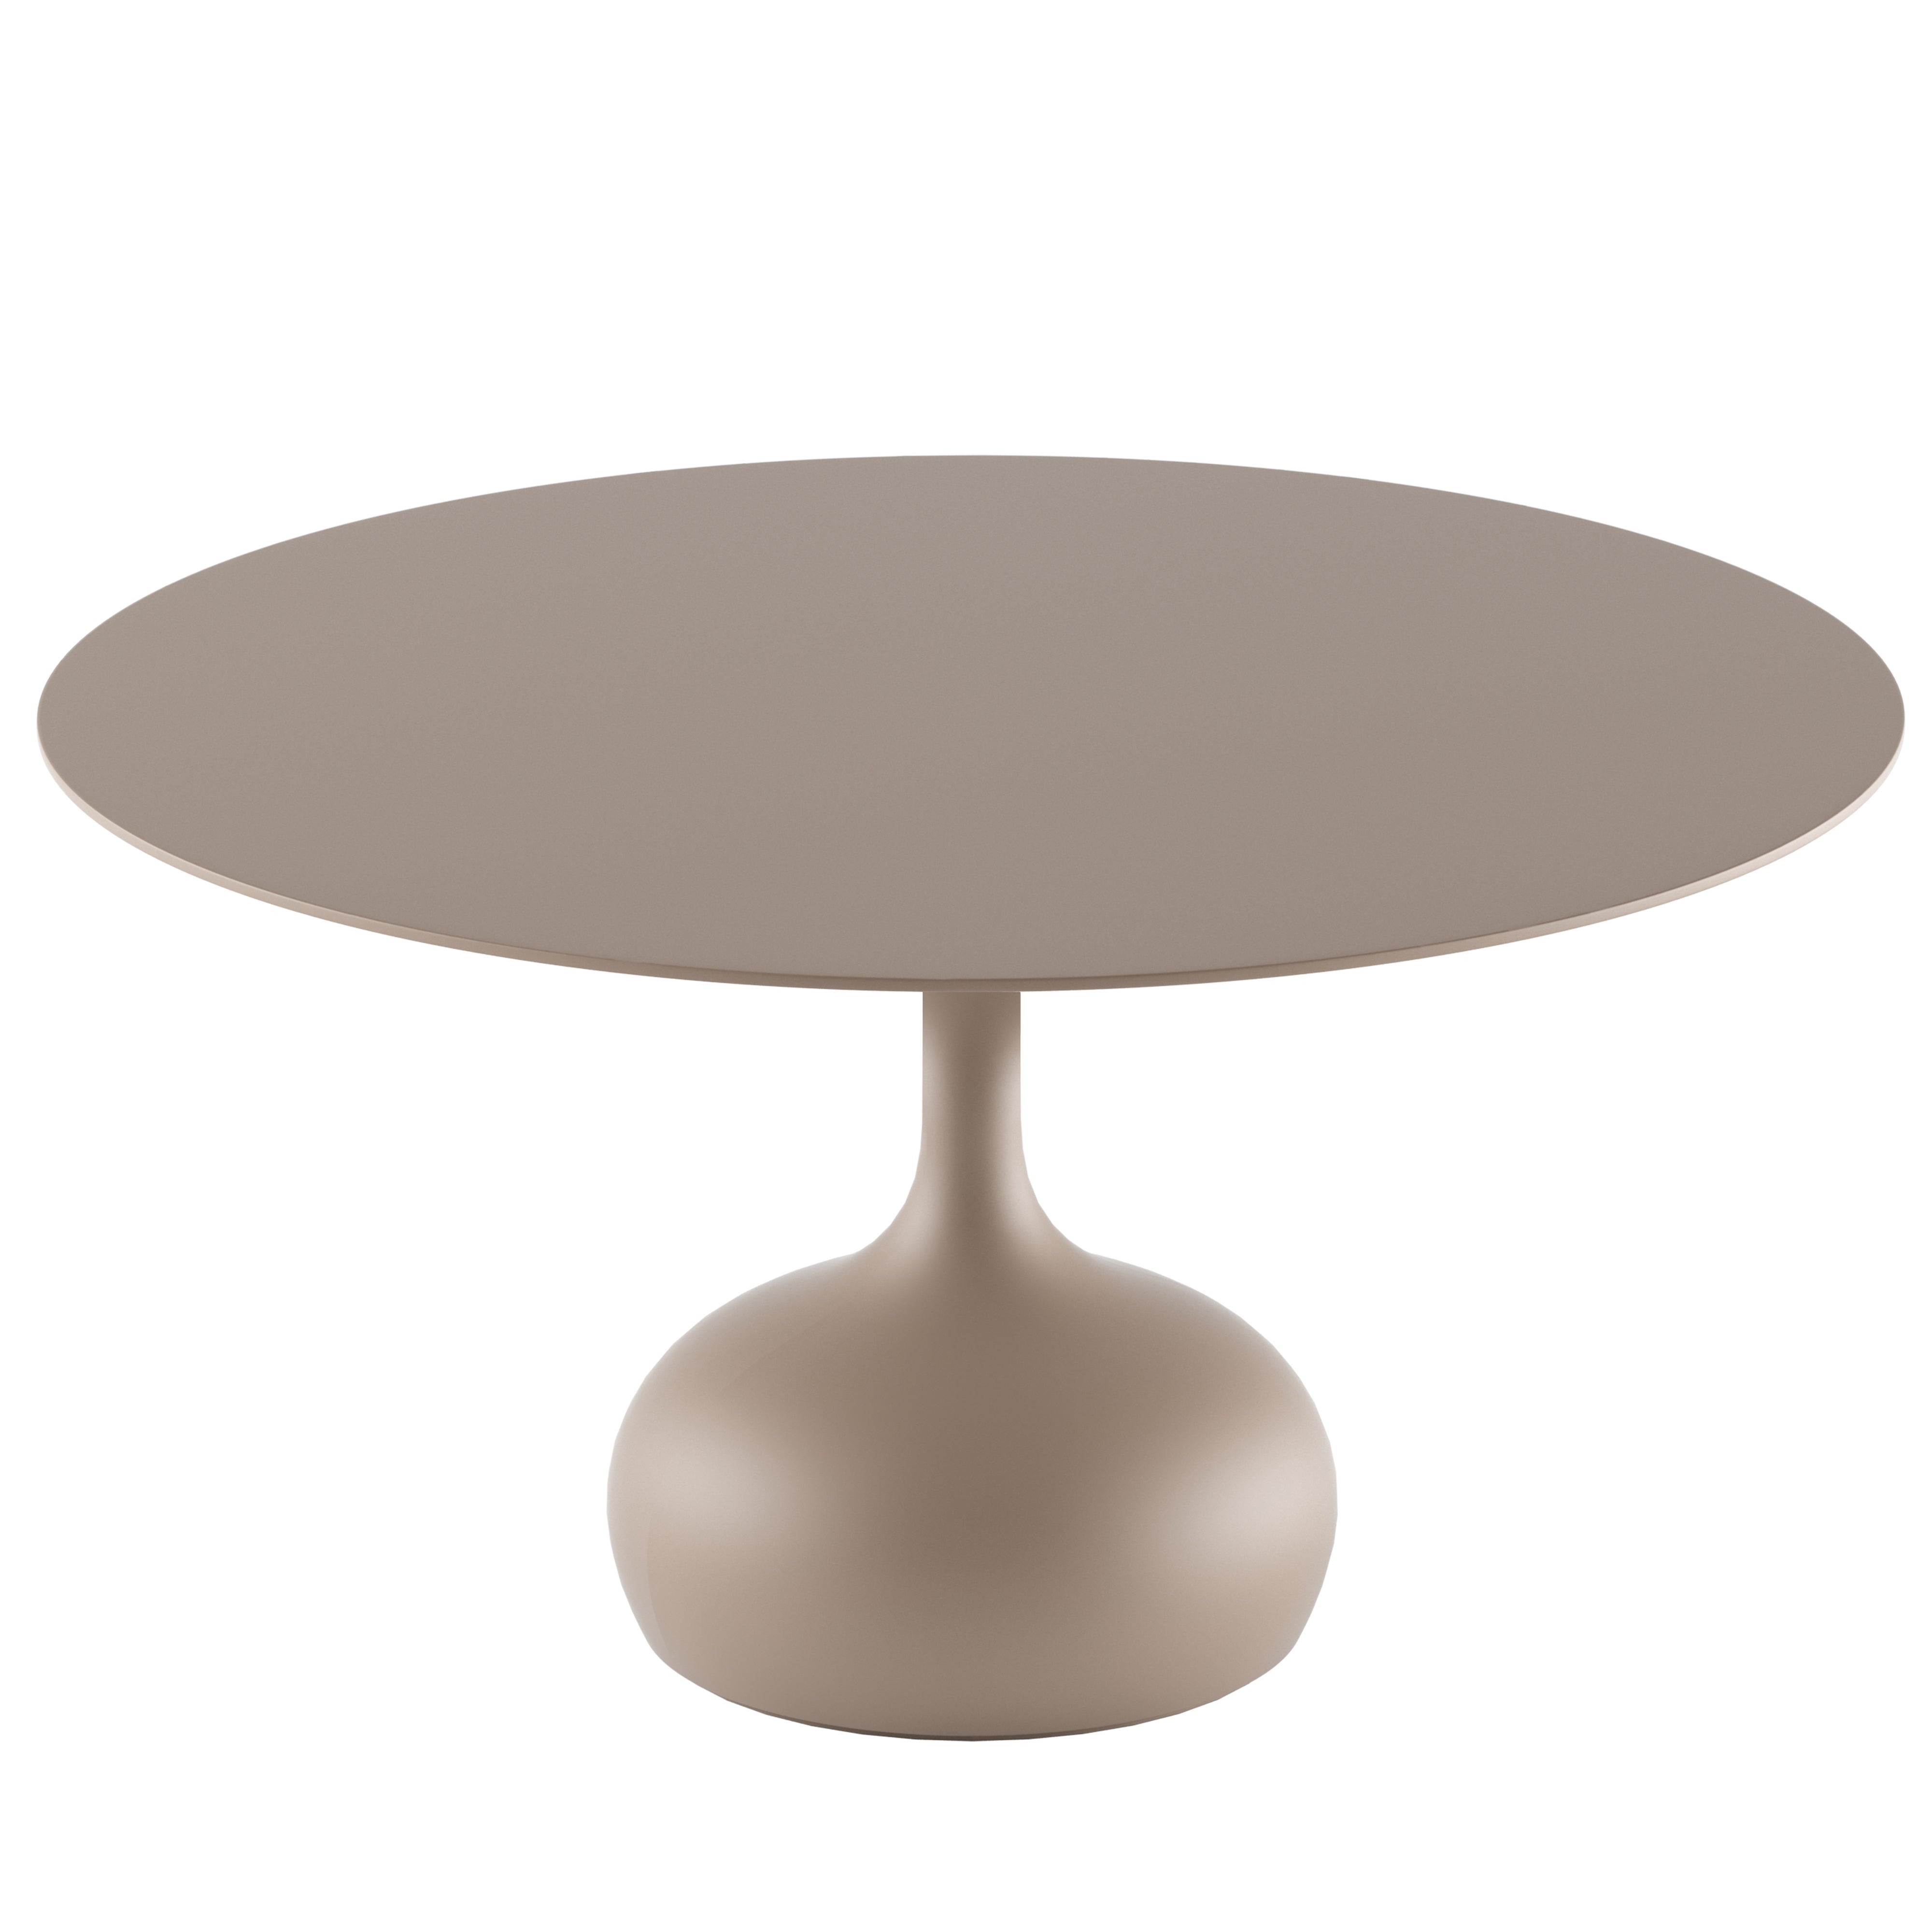 Alias 011 Saen Table Ø140 in Sand Lacquered MDF Top by Gabriele e Oscar Buratti For Sale